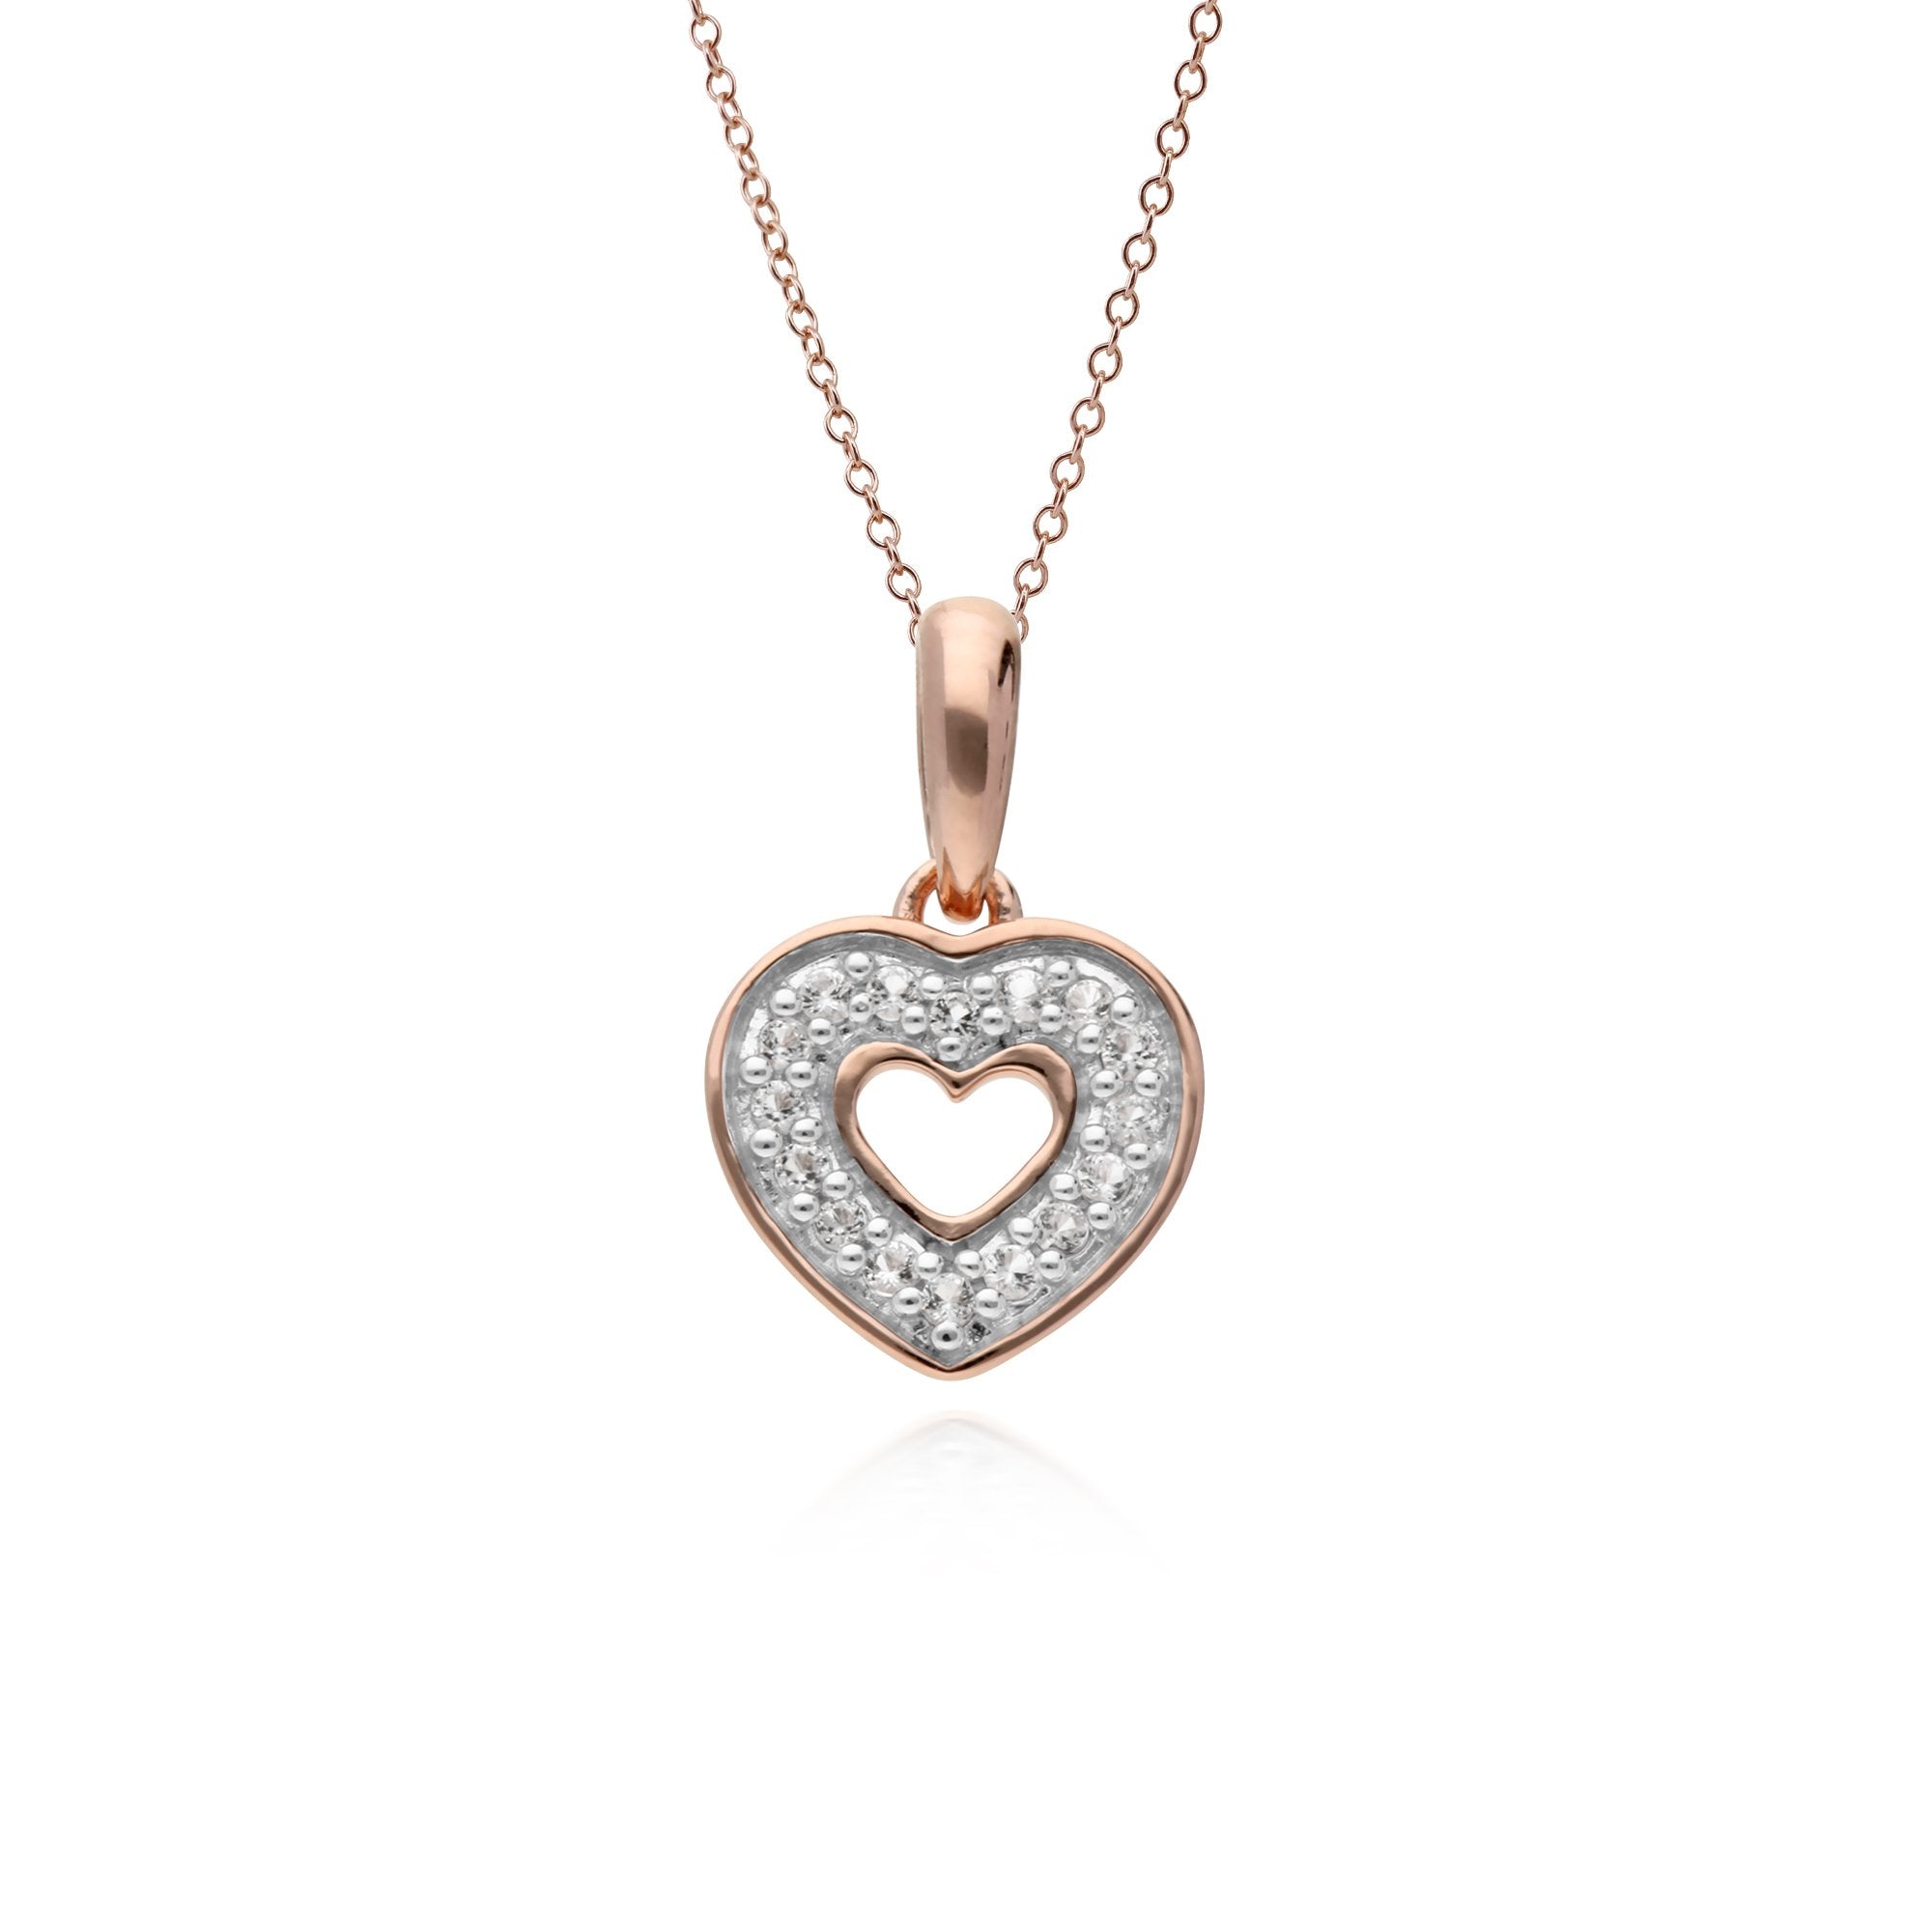 Gemondo Rose Gold Plated Sterling Silver Topaz Heart Pendant with 45cm Chain